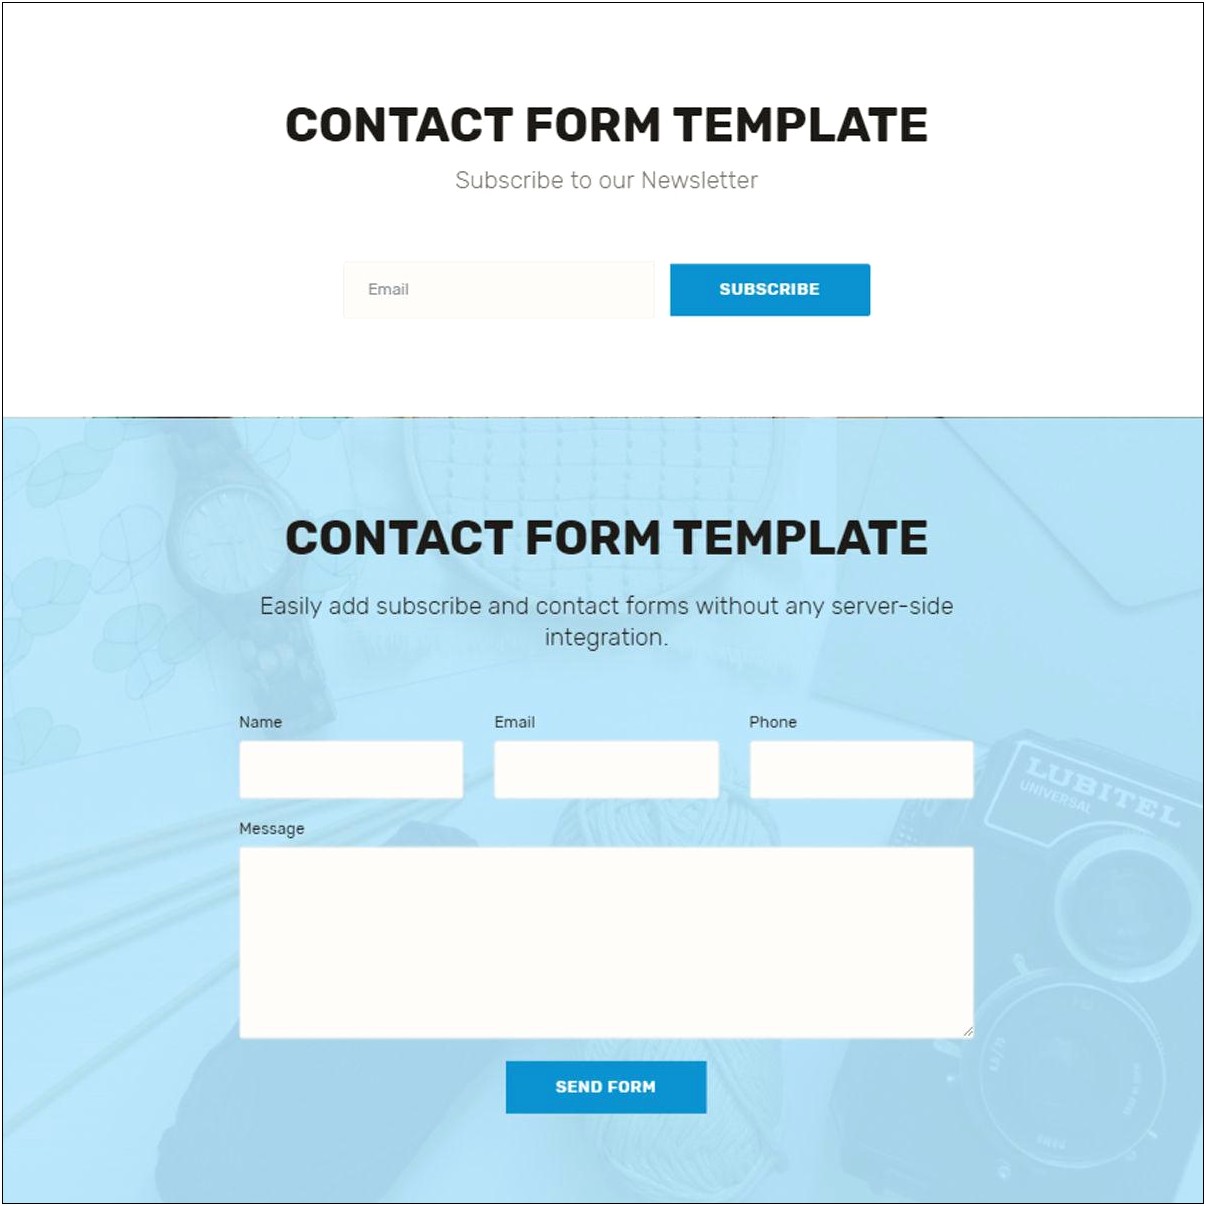 html-contact-us-form-template-free-download-templates-resume-designs-xrvy89b1zl